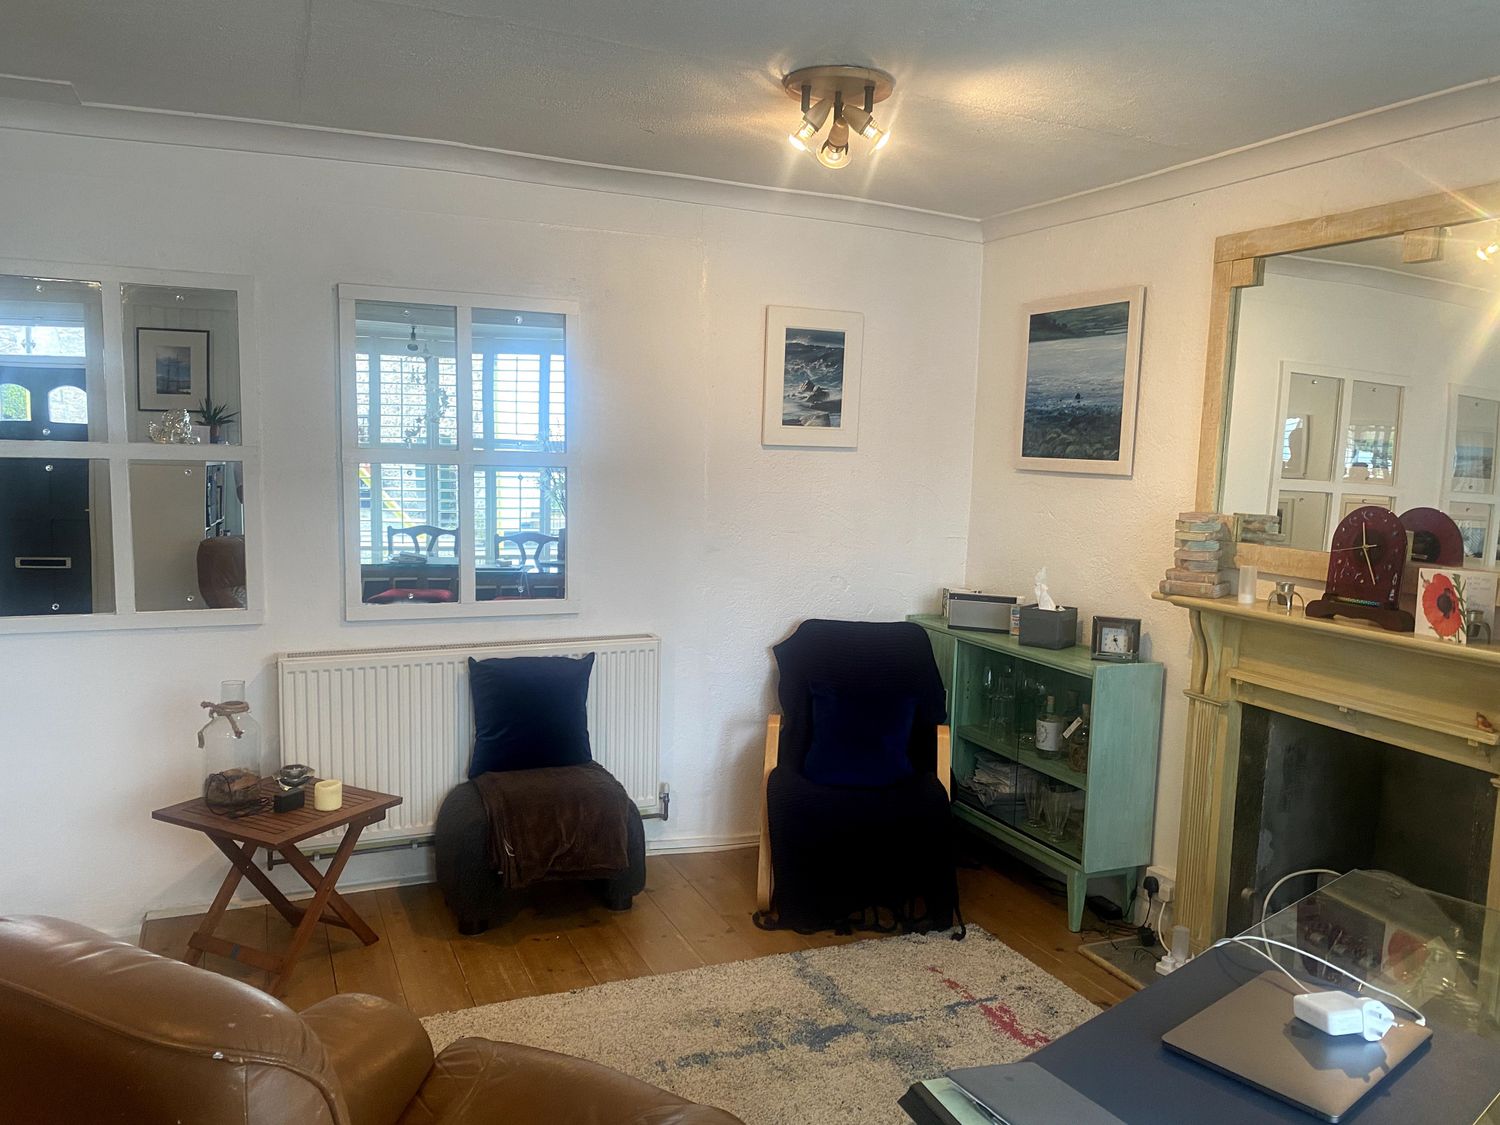 Gallery Photo of Bodmin office 